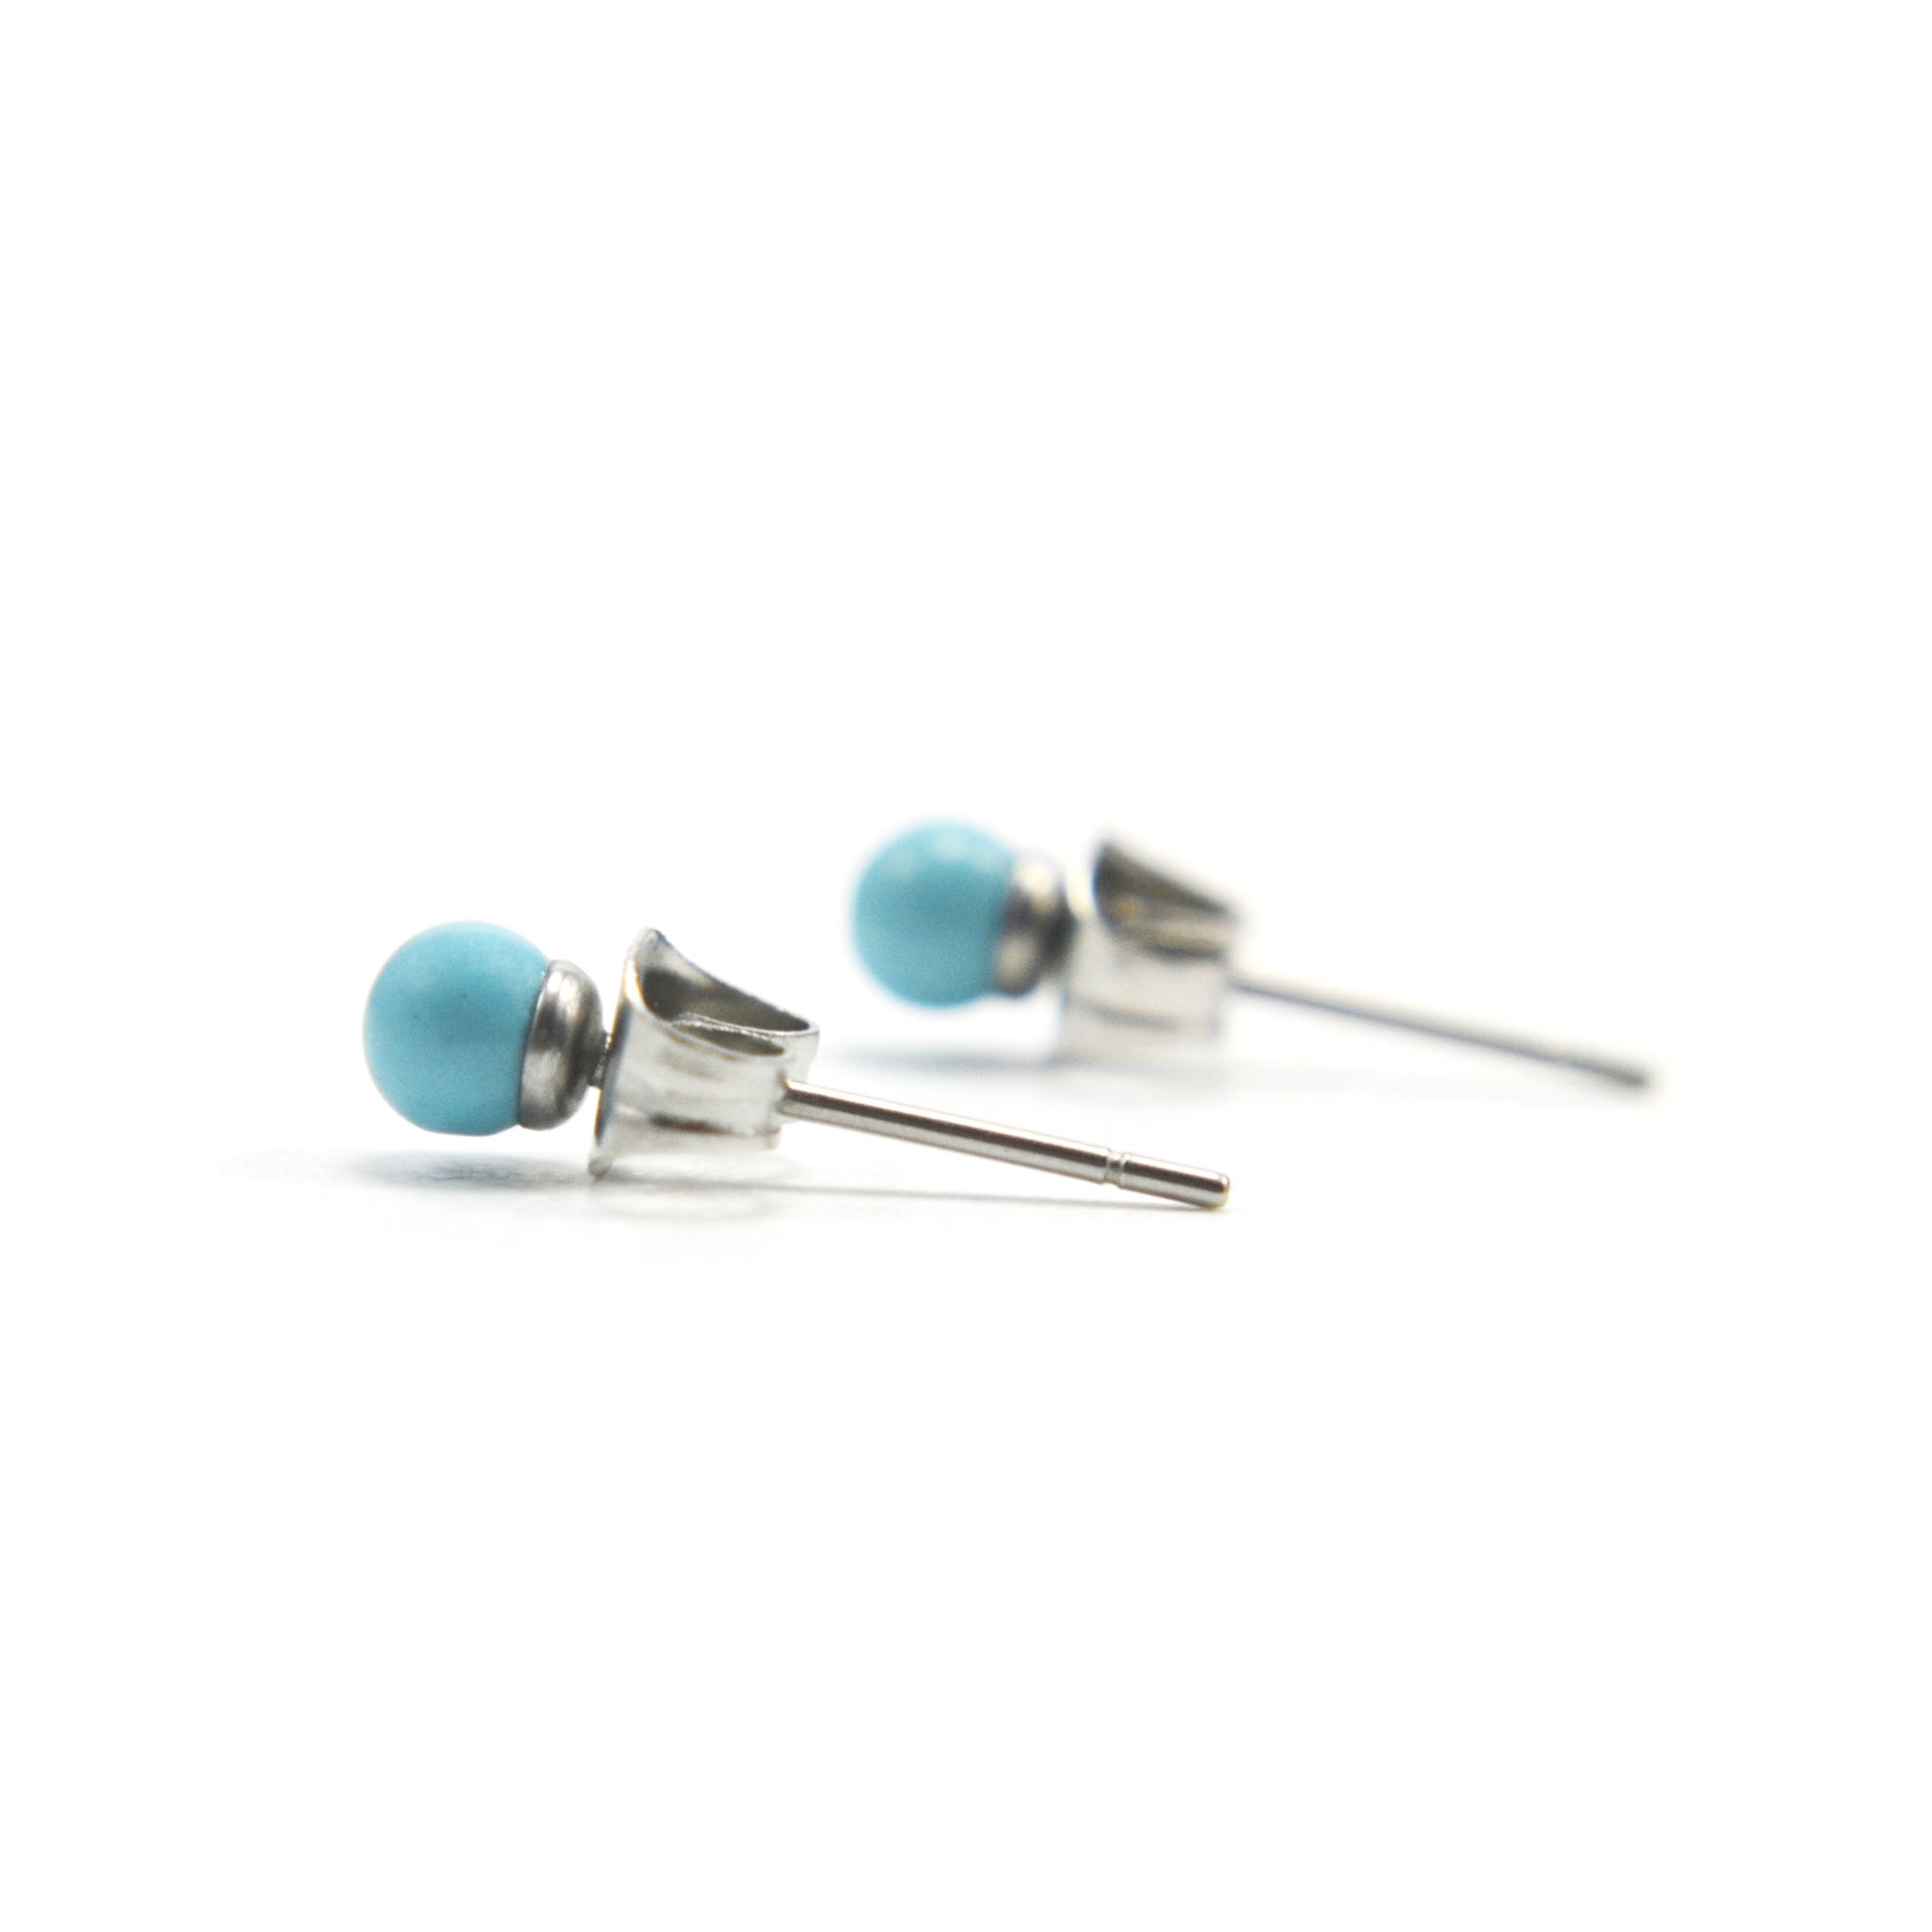 Small turquoise stud earrings side view on white background